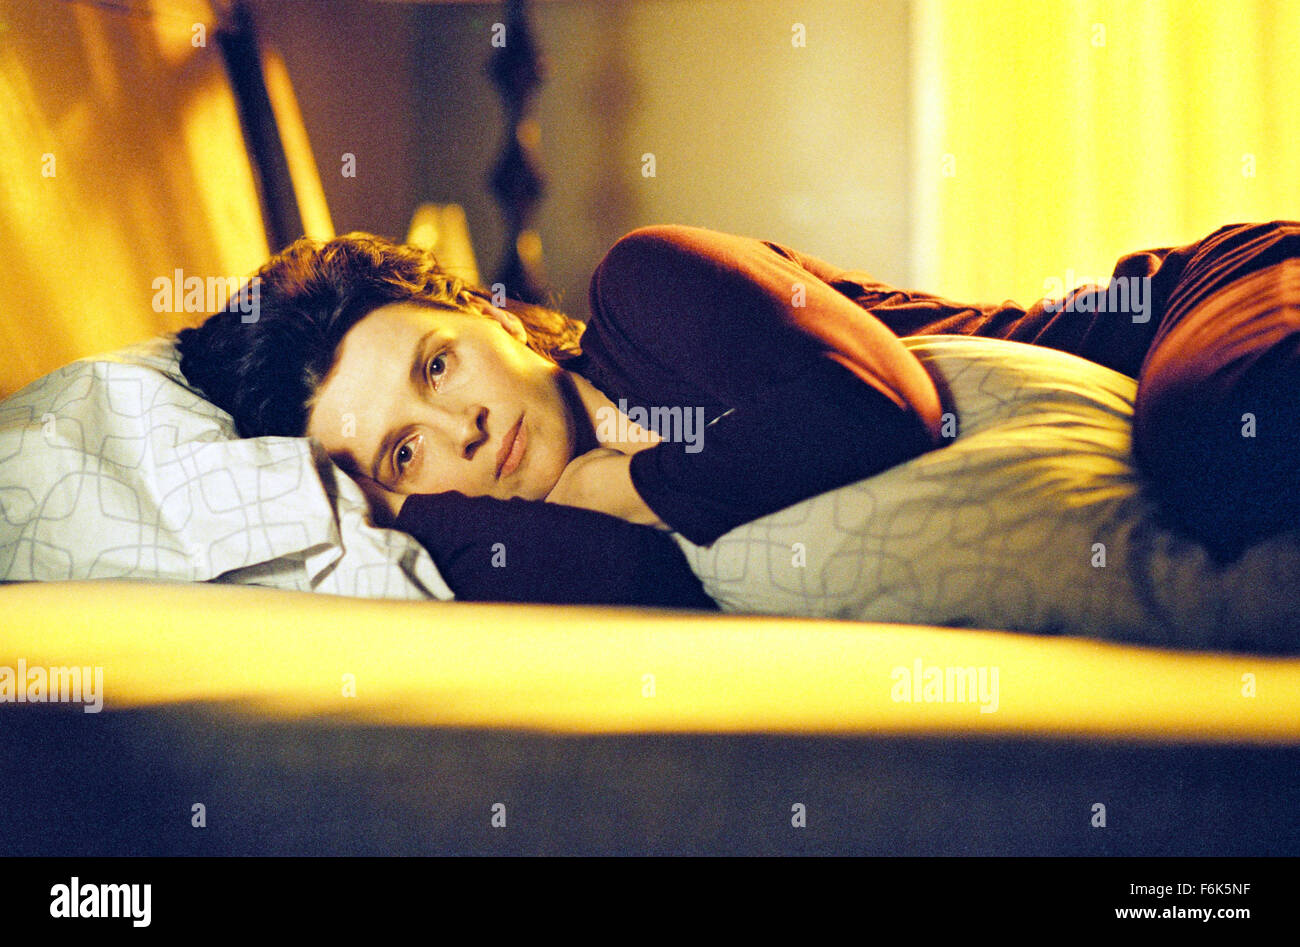 RELEASE DATE: September 3, 2005. MOVIE TITLE: Bee Season. STUDIO: Fox Searchlight. PLOT: A wife and mother begins a downward emotional spiral, as her husband avoids their collapsing marriage by immersing himself in his 11 year-old daughter's quest to become a spelling bee champion. PICTURED: JULIETTE BINOCHE stars as Miriam Neumann. Stock Photo